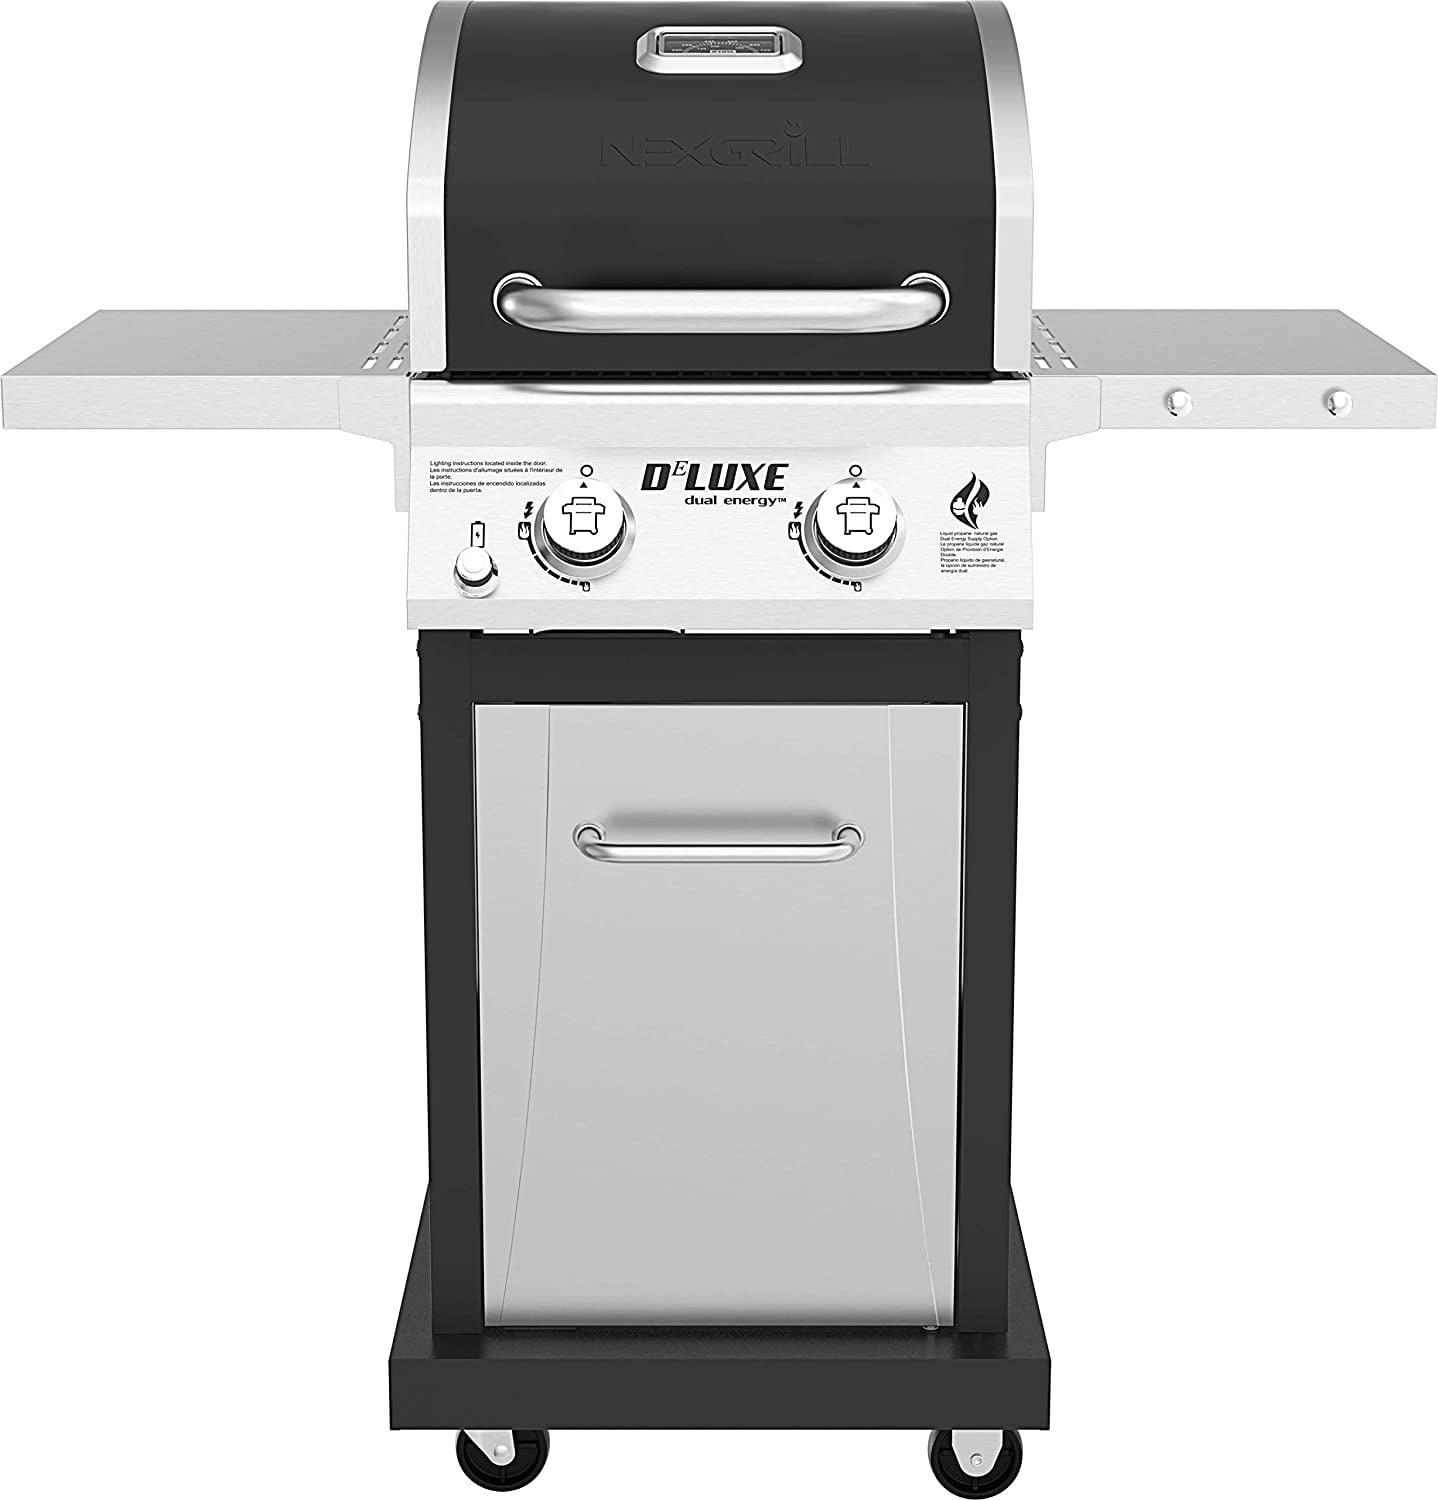 Nexgrill Deluxe 2 Burner Propane Gas Grill, for Outdoor Cooking, Patio, Garden Barbecue Grill with Two Foldable Shelves, Silver and Black